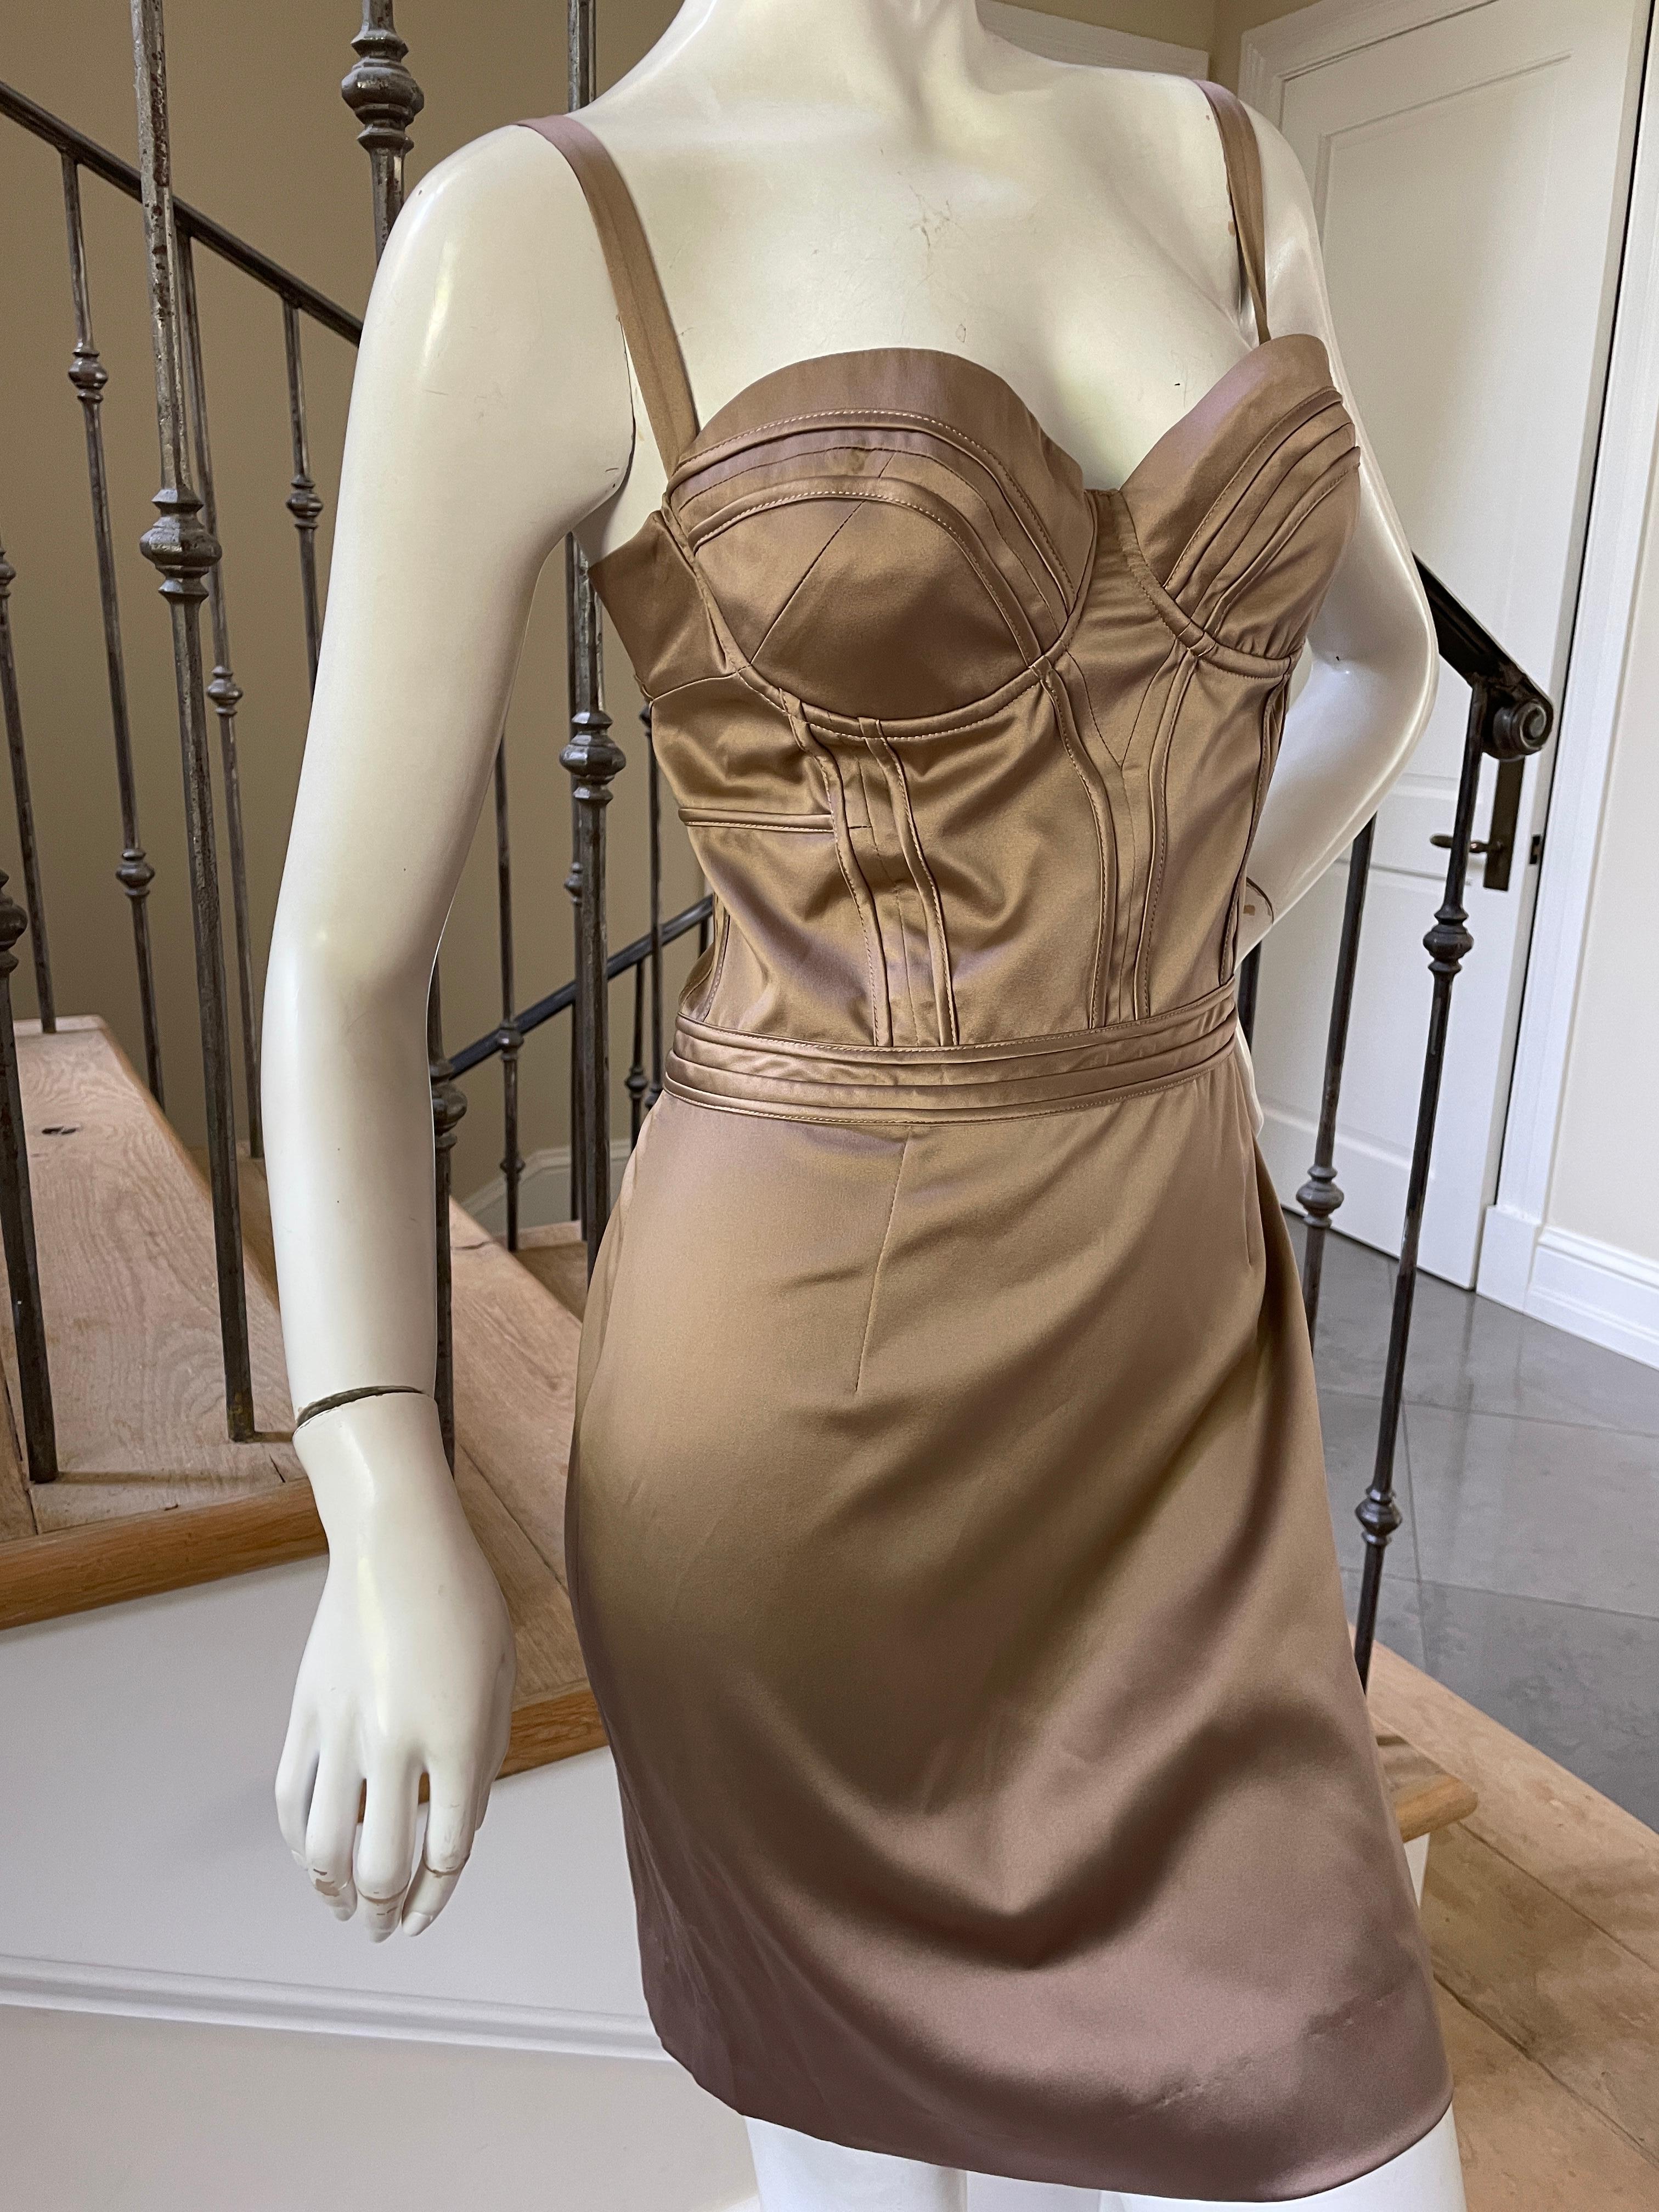 Brown Just Cavalli Sexy Dust Rose Pink Corset Cocktail Dress by Roberto Cavalli For Sale